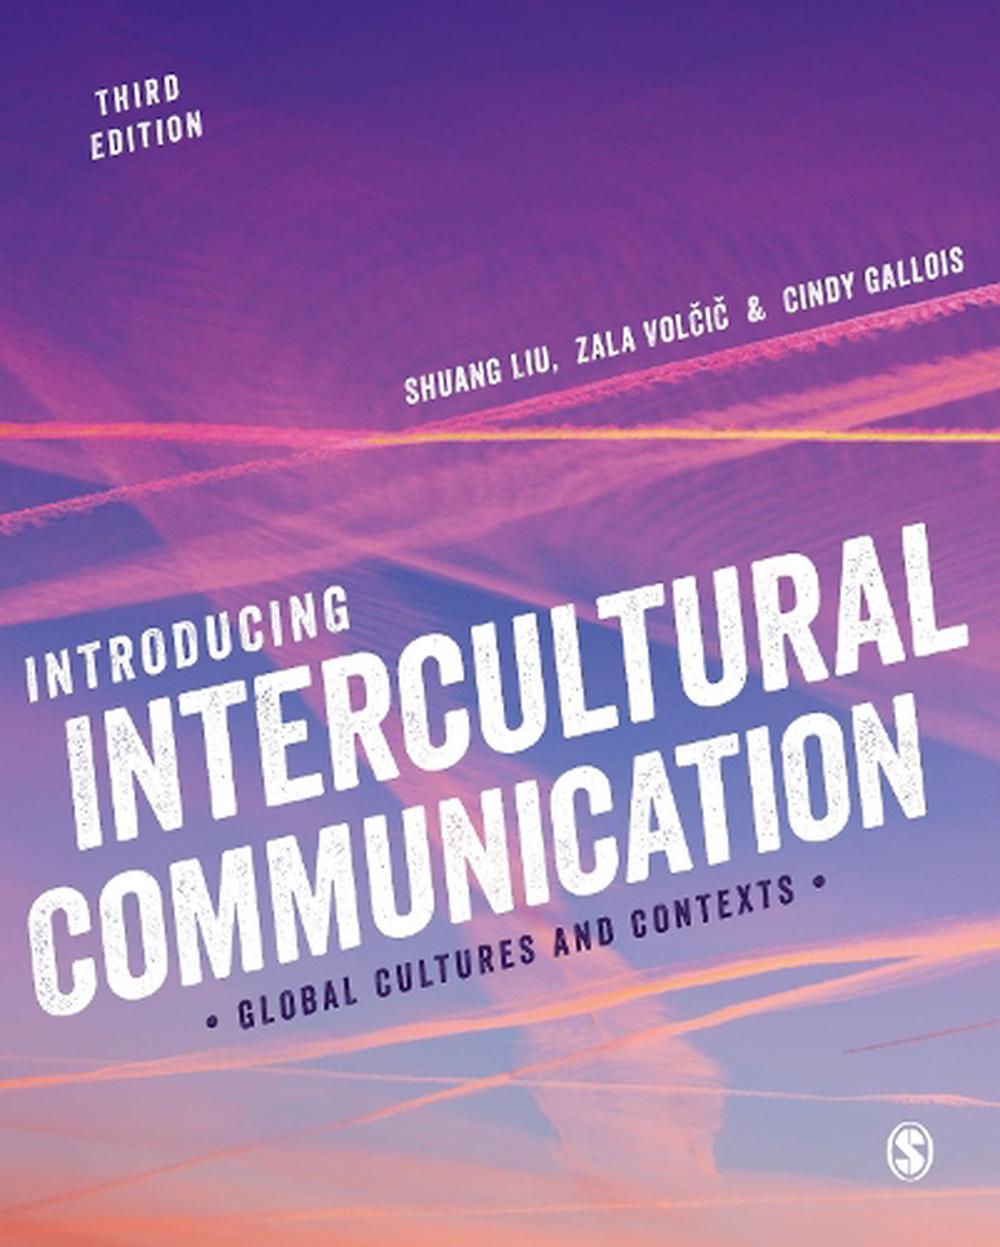 research on intercultural communication